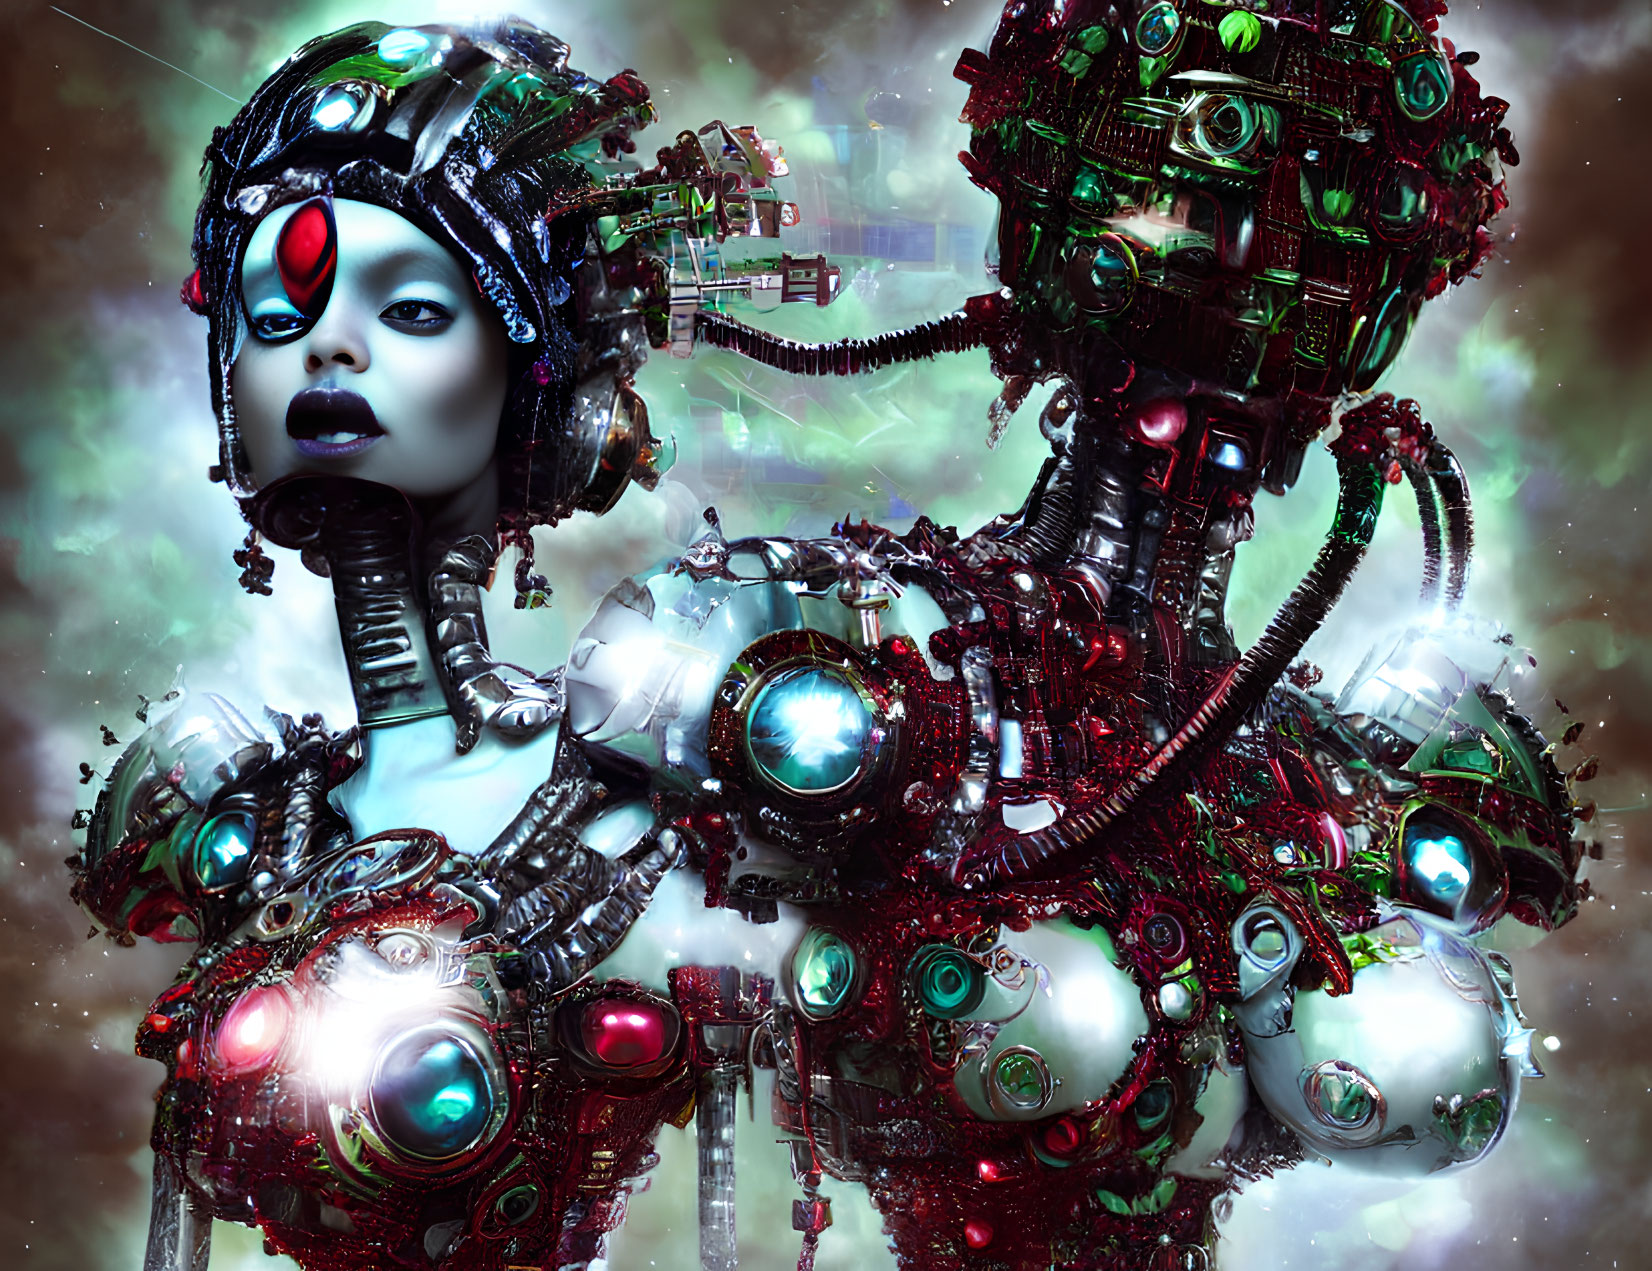 Detailed Futuristic Female Robot Artwork with Glowing Elements